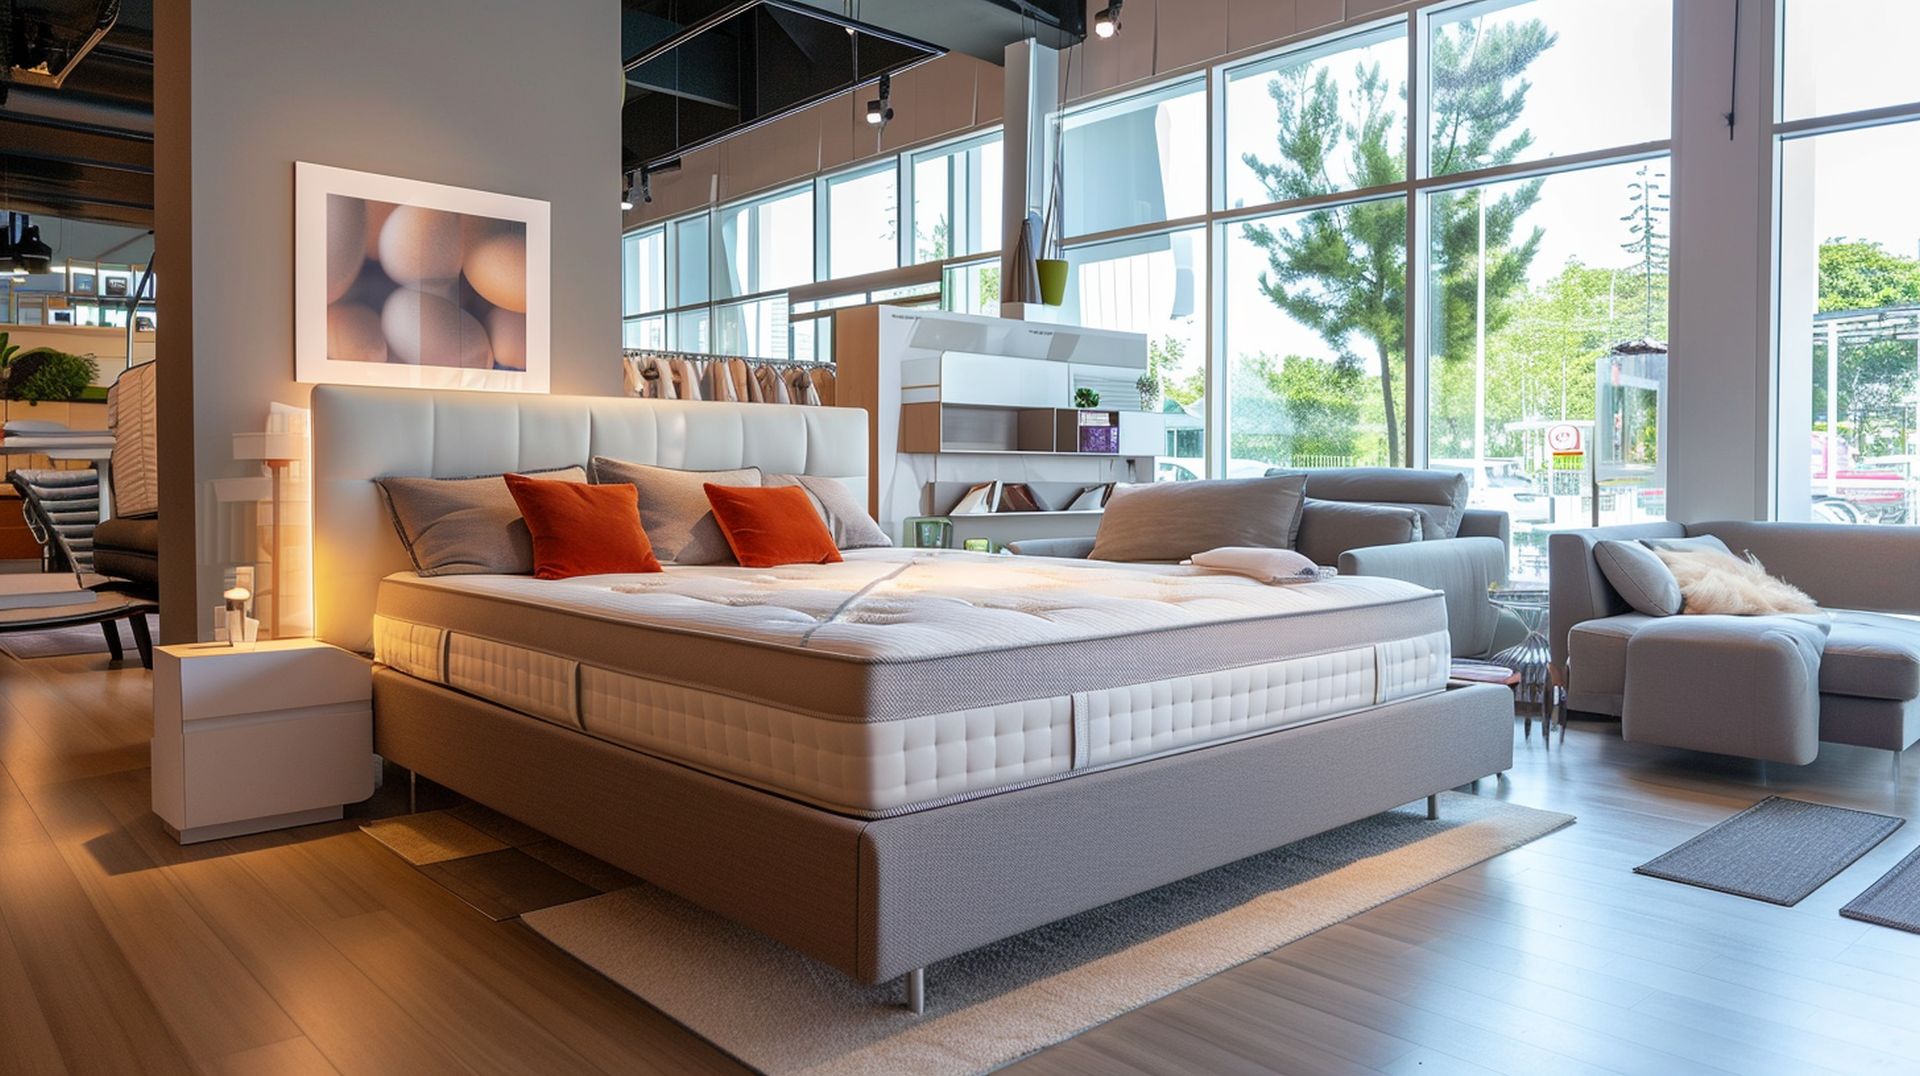 Types of mattresses at mattress dealers in Lexington, KY